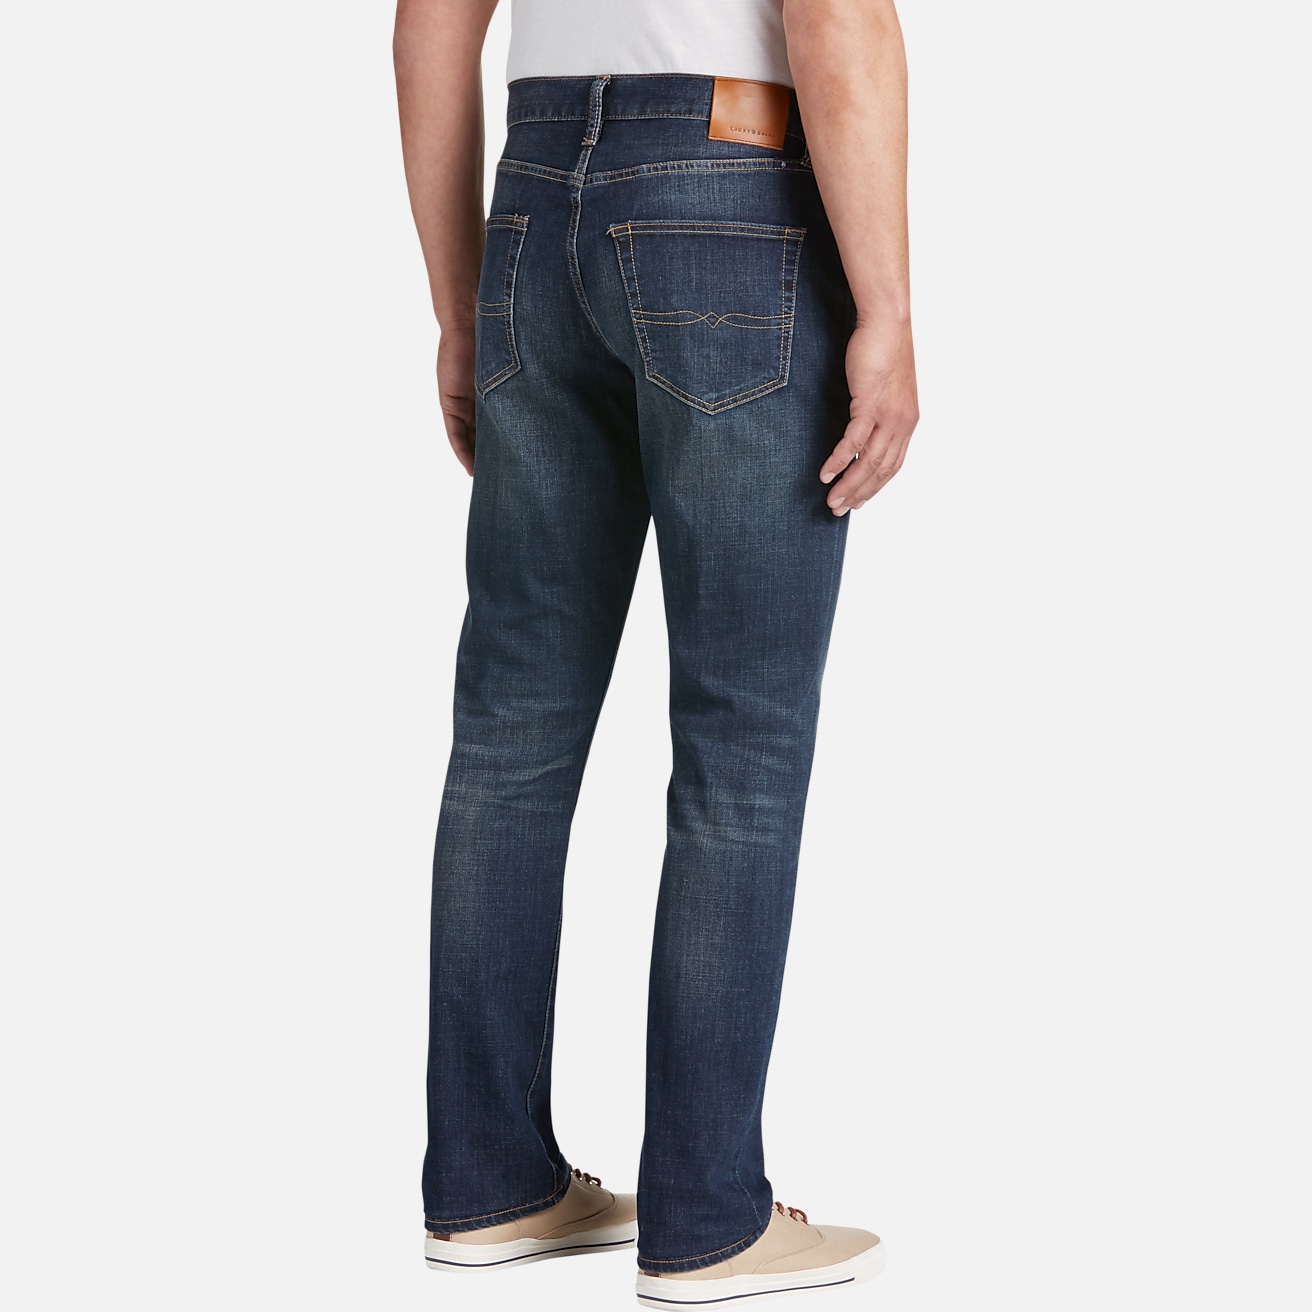 Lucky Brand Jeans 410 Athletic Fit Relaxed 31 X 32  Lucky brand jeans mens,  Athletic fit jeans, Lucky brand jeans